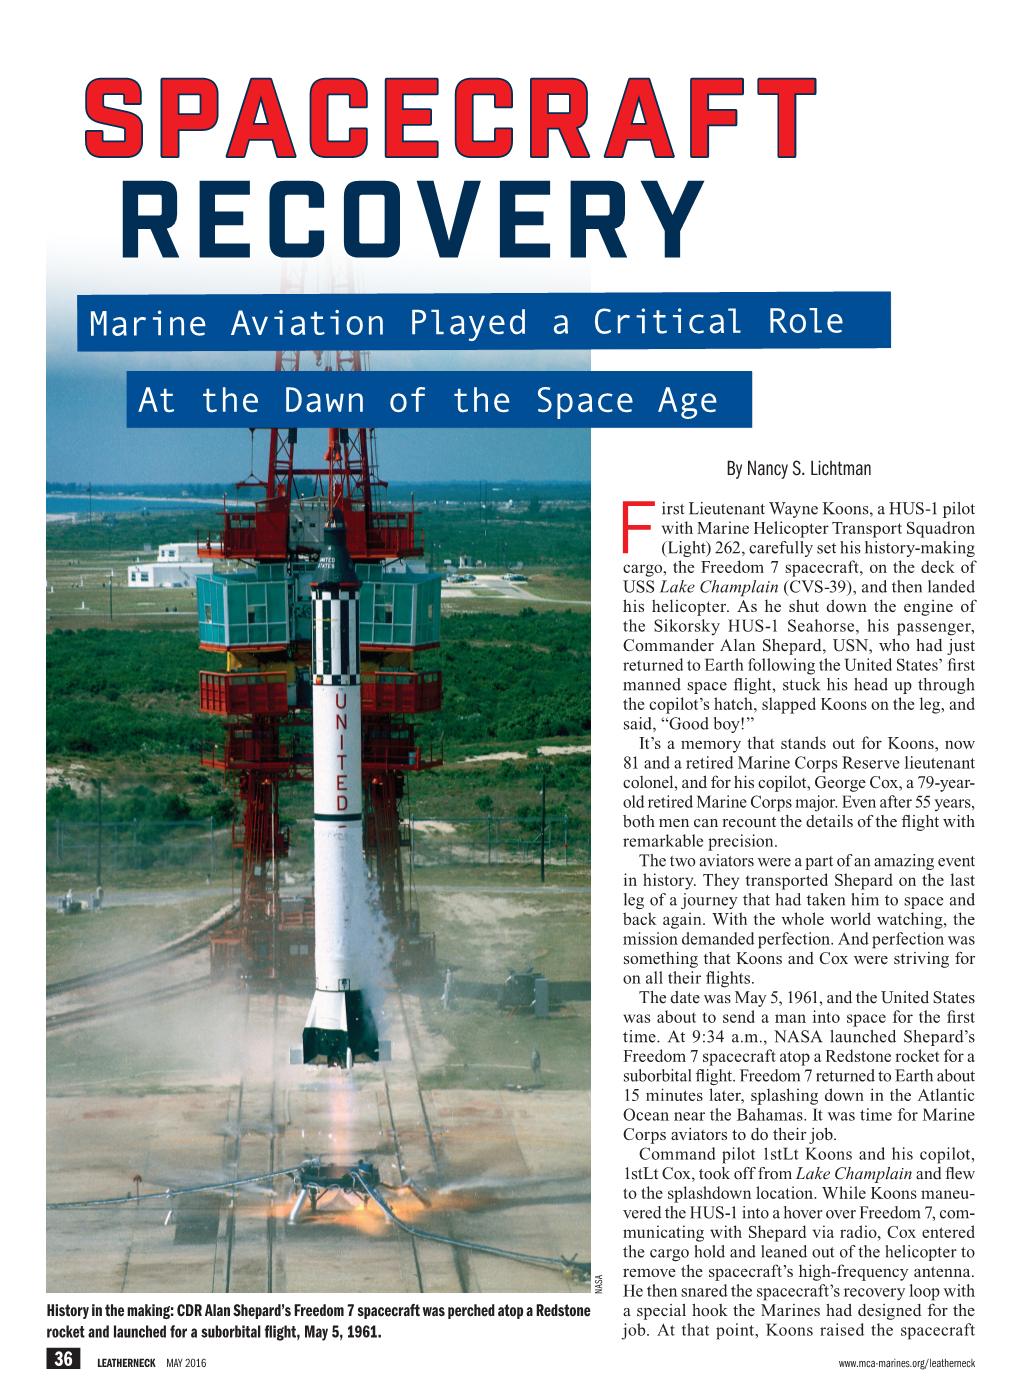 Spacecraft Recovery Article Download